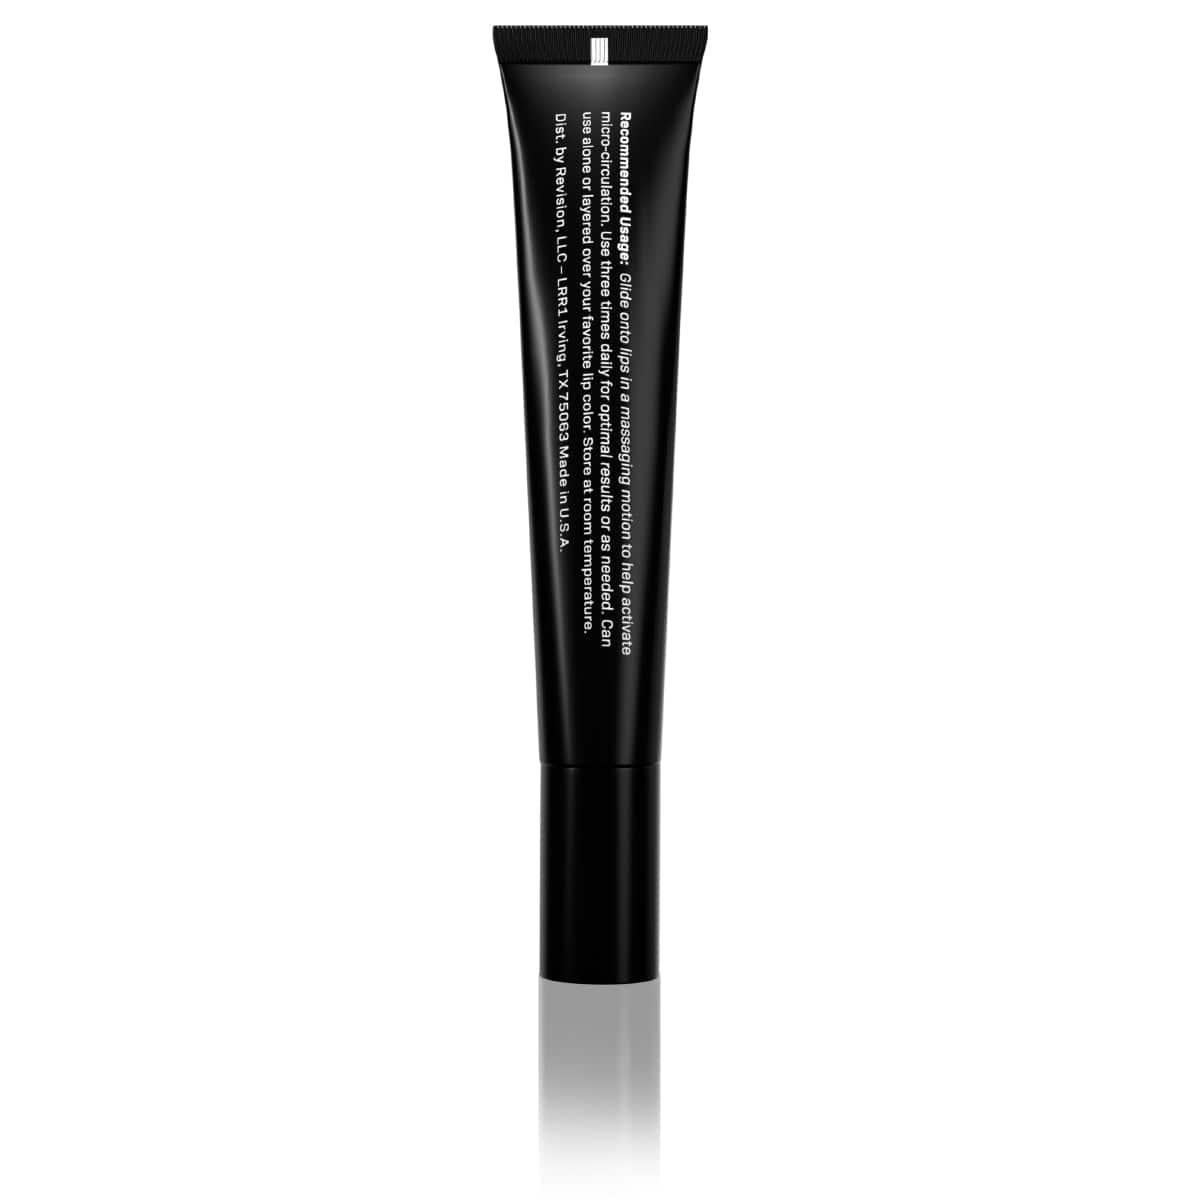 YouthFull Lip Replenisher™ -the definitive solution for youthful lips - Tube Back Down